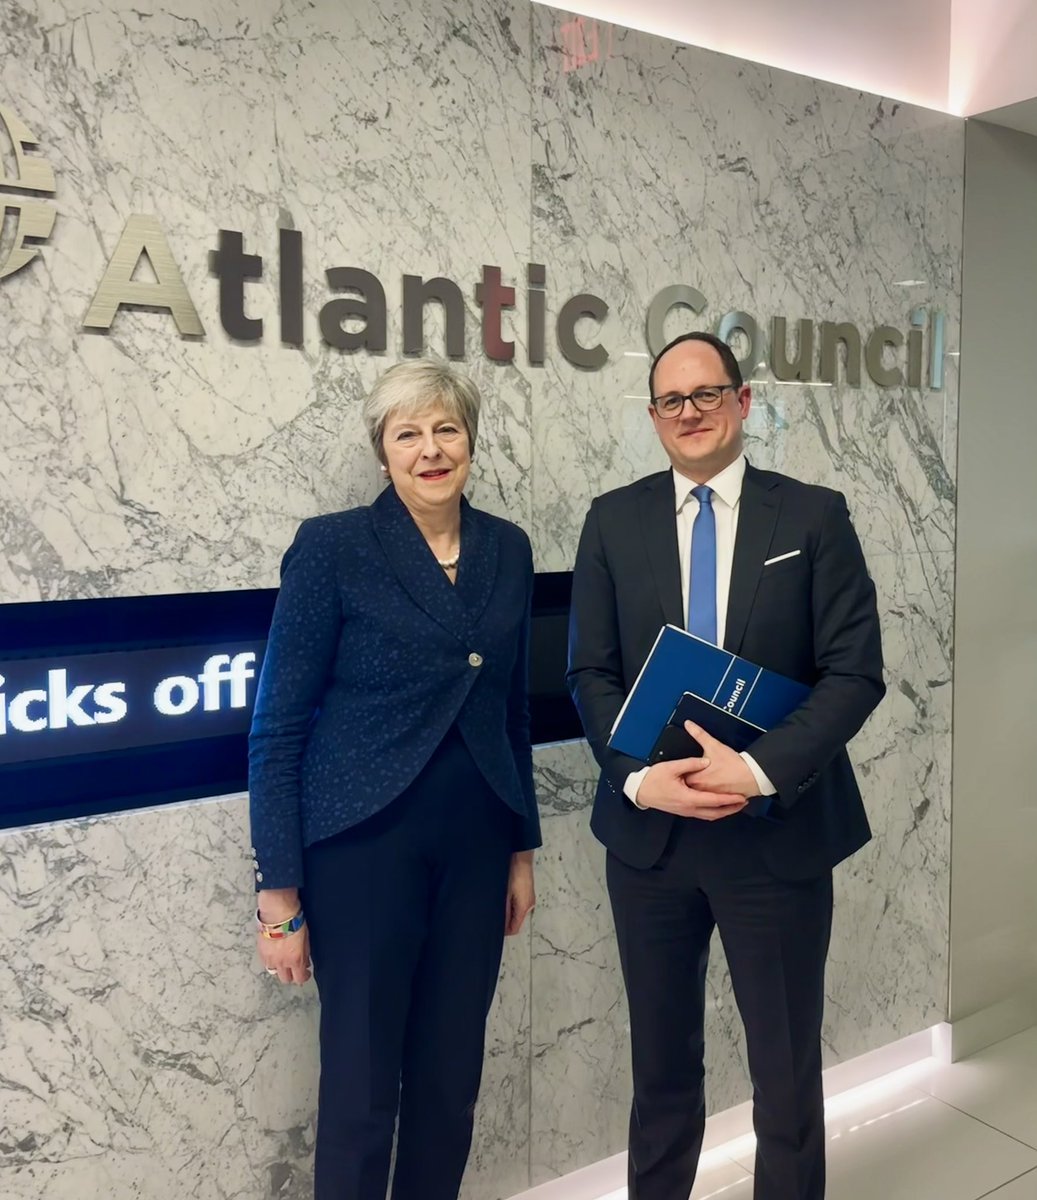 Six years on from Russia’s reckless use of a nerve agent on the streets of Salisbury, I spoke to the @AtlanticCouncil yesterday about the importance of a strong and unified Western alliance. We must continue to stand up for our values in the face of Russian aggression.